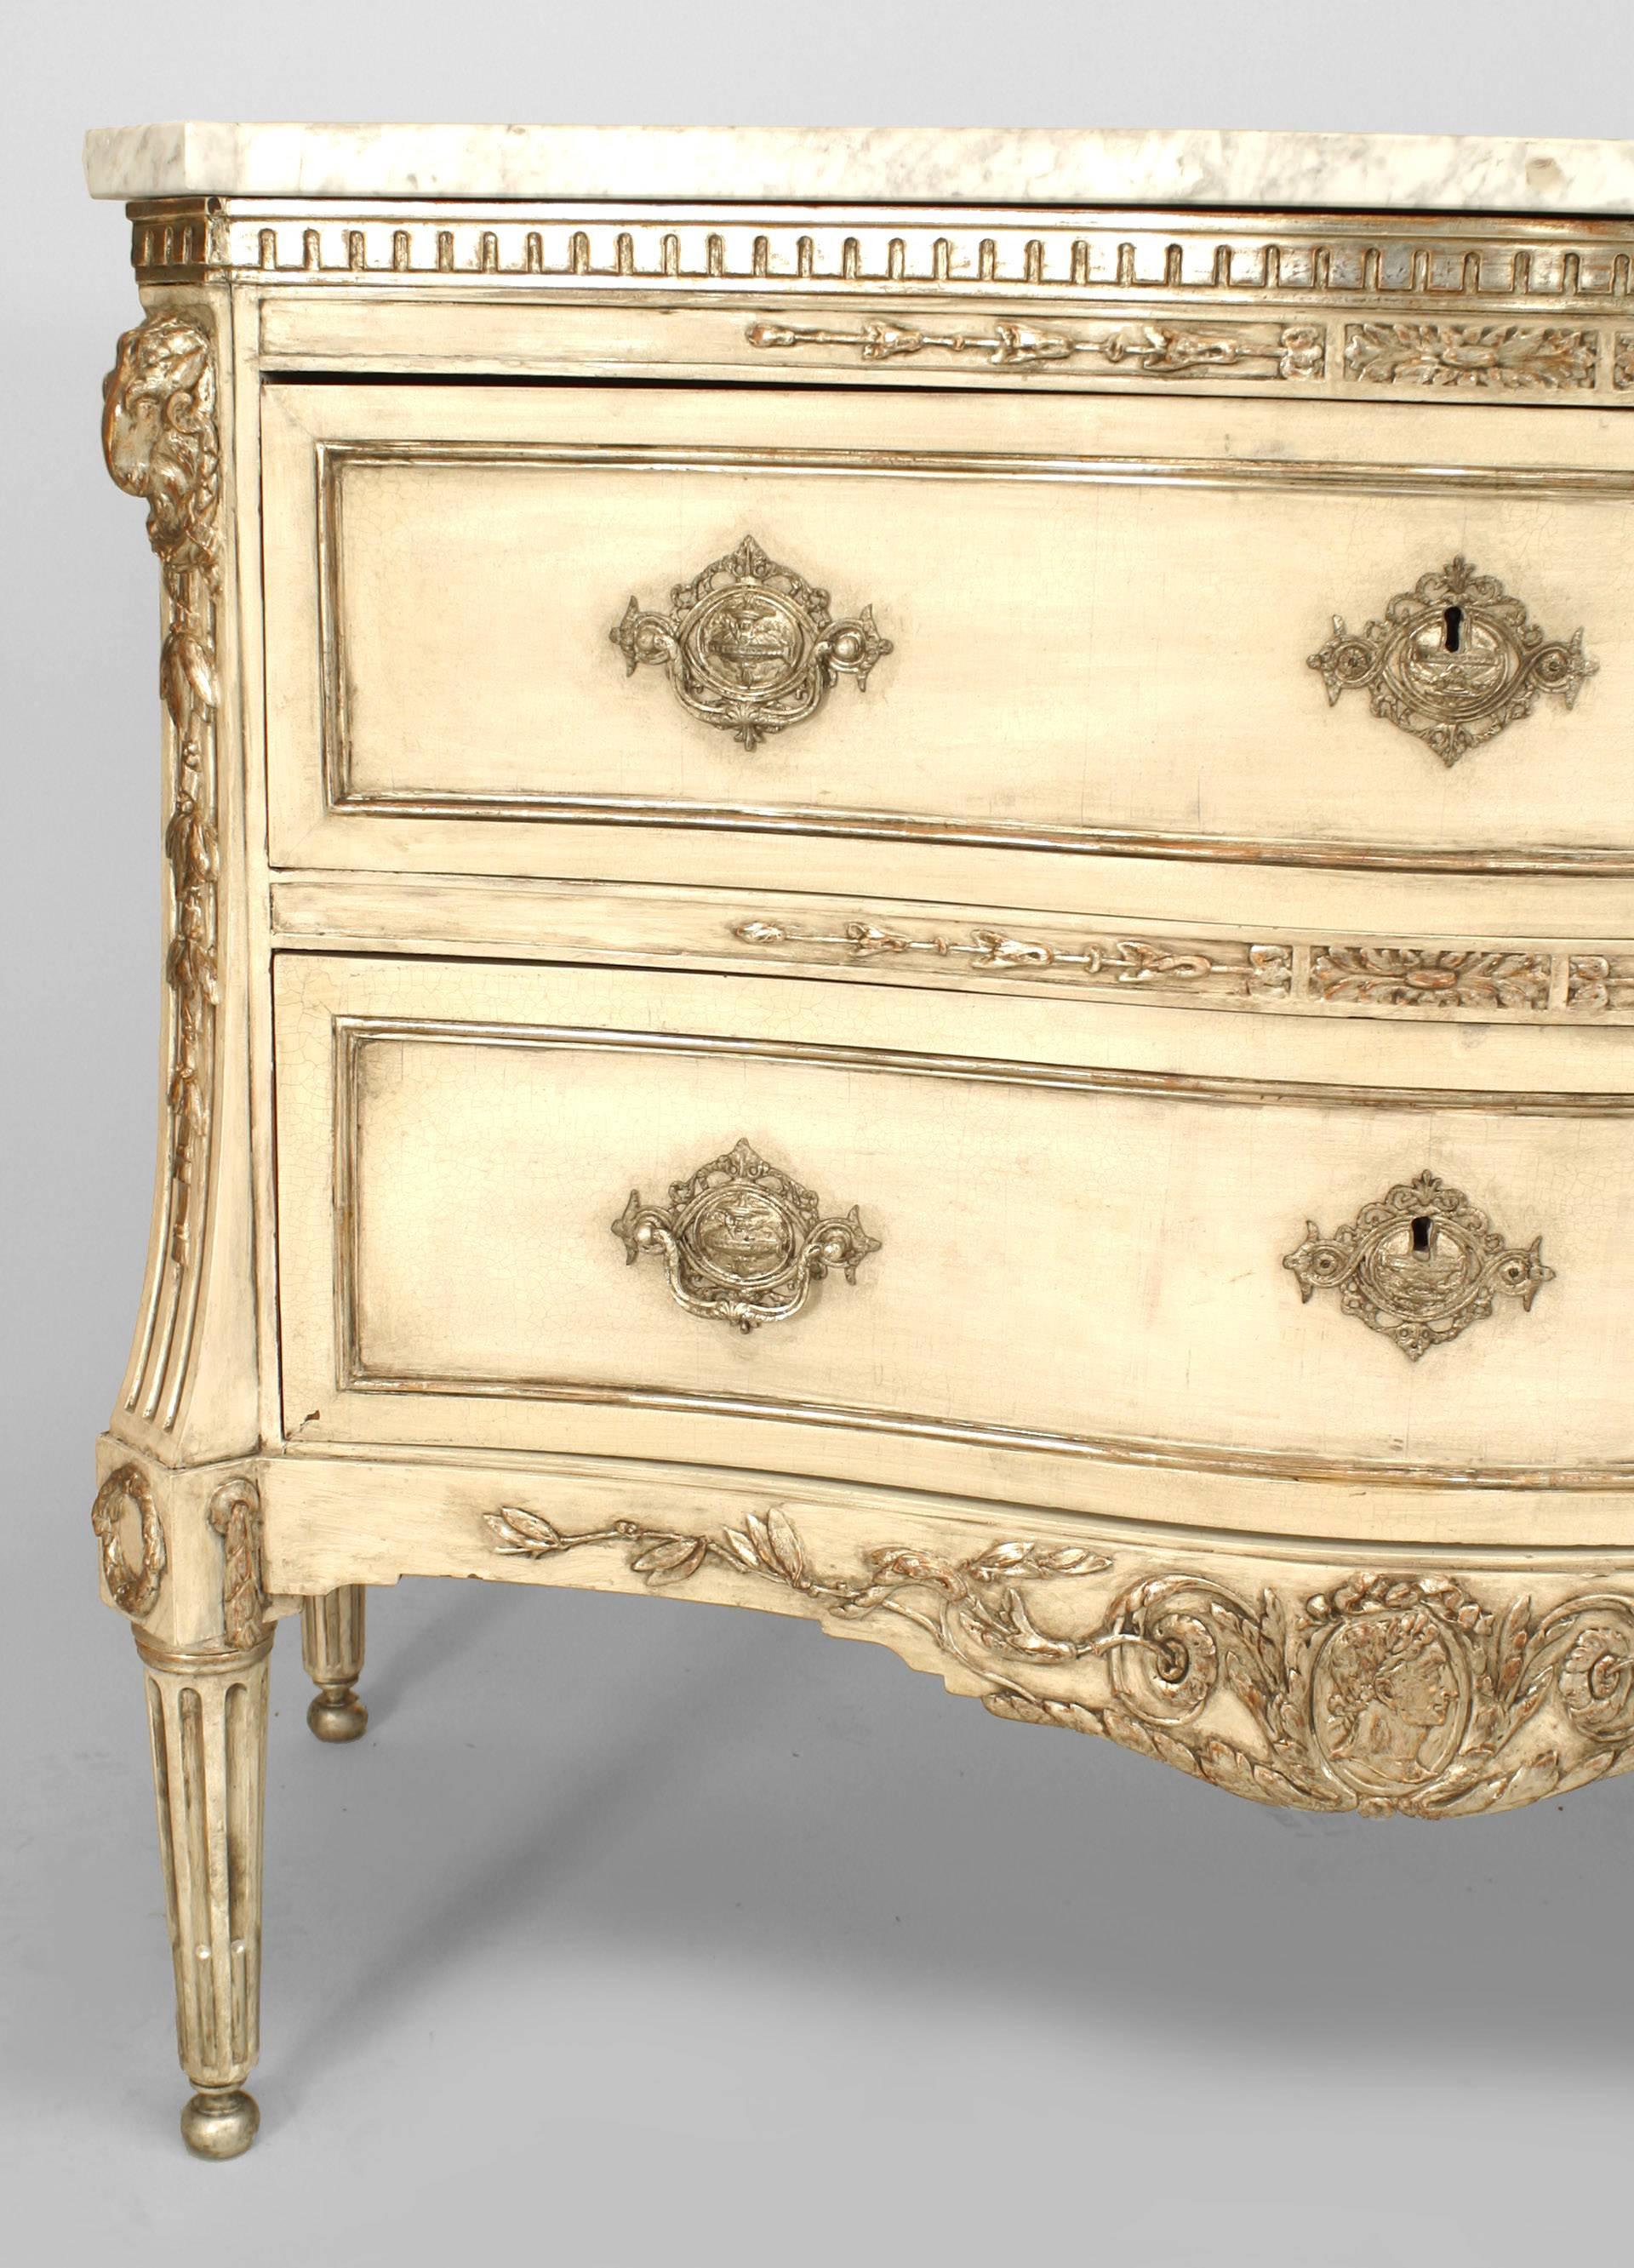 Neoclassical Continental Neoclassic Painted Chest